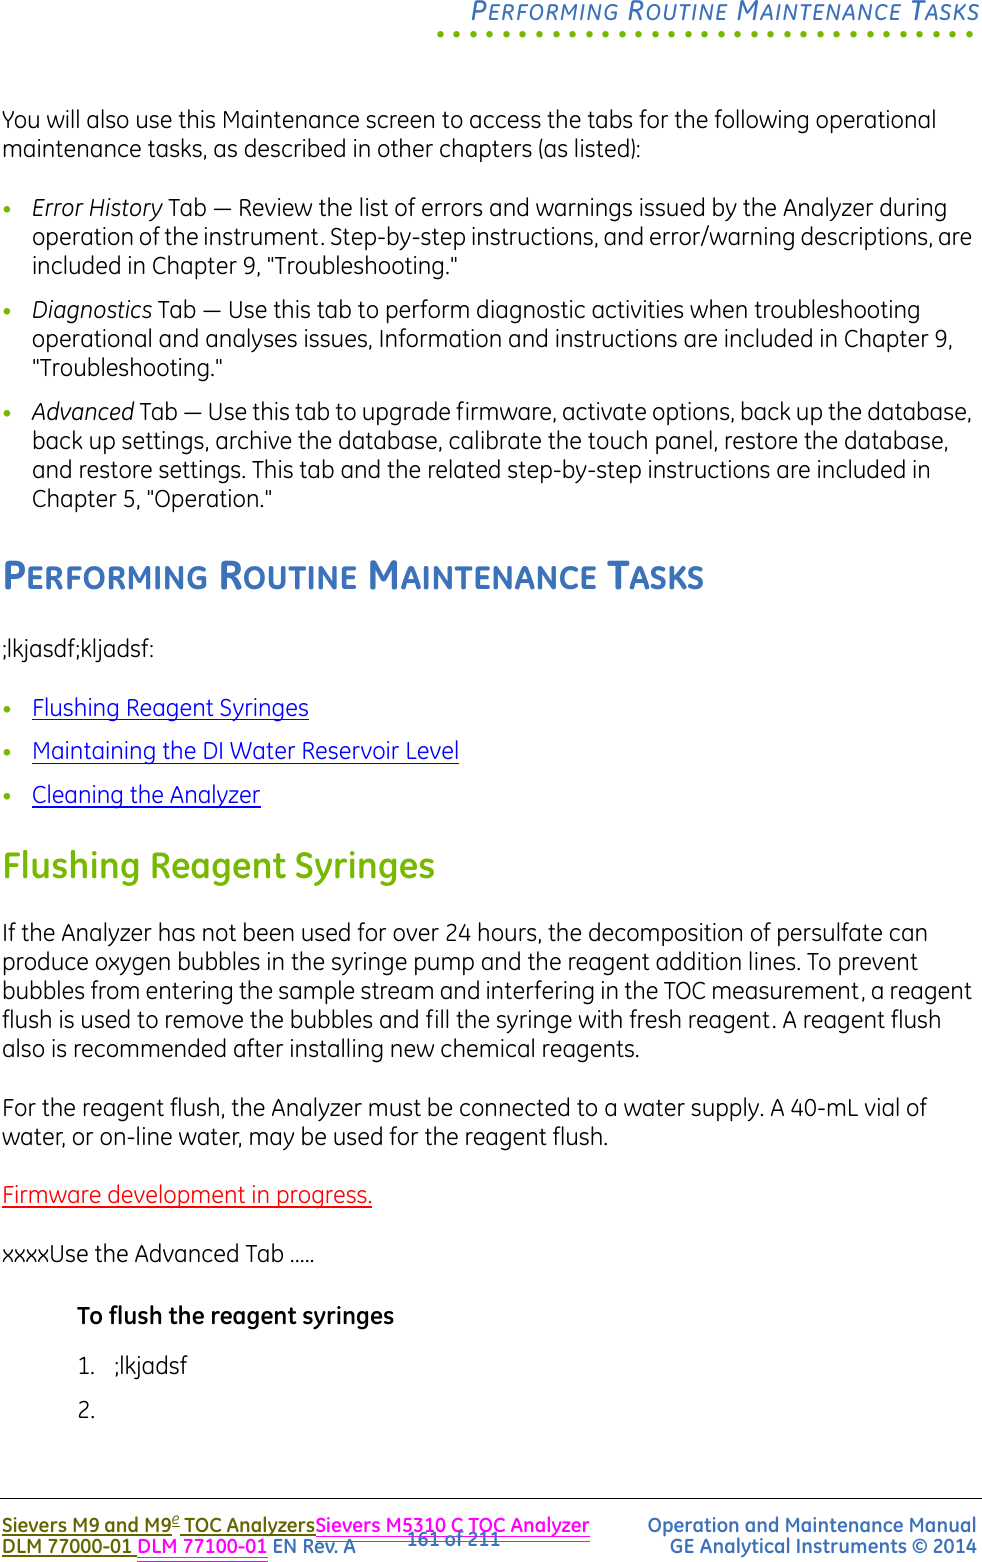 .................................PERFORMING ROUTINE MAINTENANCE TASKSSievers M9 and M9e TOC AnalyzersSievers M5310 C TOC Analyzer Operation and Maintenance ManualDLM 77000-01 DLM 77100-01 EN Rev. A GE Analytical Instruments © 2014161 of 211You will also use this Maintenance screen to access the tabs for the following operational maintenance tasks, as described in other chapters (as listed):•Error History Tab — Review the list of errors and warnings issued by the Analyzer during operation of the instrument. Step-by-step instructions, and error/warning descriptions, are included in Chapter 9, &quot;Troubleshooting.&quot;•Diagnostics Tab — Use this tab to perform diagnostic activities when troubleshooting operational and analyses issues, Information and instructions are included in Chapter 9, &quot;Troubleshooting.&quot;•Advanced Tab — Use this tab to upgrade firmware, activate options, back up the database, back up settings, archive the database, calibrate the touch panel, restore the database, and restore settings. This tab and the related step-by-step instructions are included in Chapter 5, &quot;Operation.&quot;PERFORMING ROUTINE MAINTENANCE TASKS;lkjasdf;kljadsf:•Flushing Reagent Syringes•Maintaining the DI Water Reservoir Level•Cleaning the AnalyzerFlushing Reagent SyringesIf the Analyzer has not been used for over 24 hours, the decomposition of persulfate can produce oxygen bubbles in the syringe pump and the reagent addition lines. To prevent bubbles from entering the sample stream and interfering in the TOC measurement, a reagent flush is used to remove the bubbles and fill the syringe with fresh reagent. A reagent flush also is recommended after installing new chemical reagents.For the reagent flush, the Analyzer must be connected to a water supply. A 40-mL vial of water, or on-line water, may be used for the reagent flush. Firmware development in progress.xxxxUse the Advanced Tab .....To flush the reagent syringes1. ;lkjadsf2.